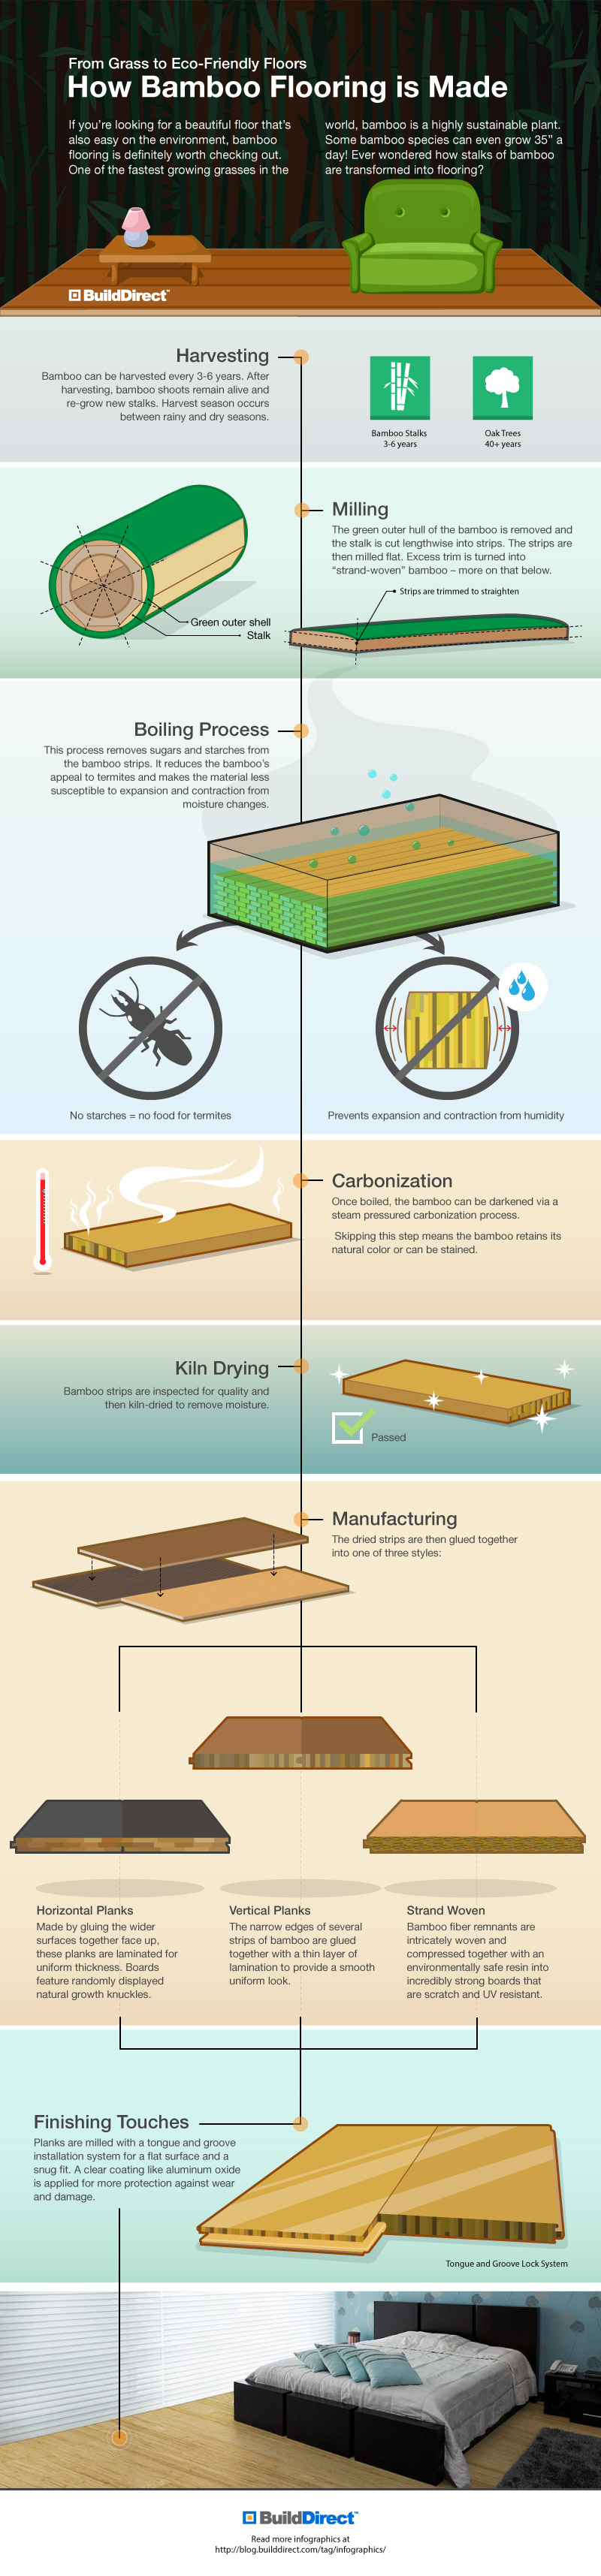 how Bamboo Flooring Is Made